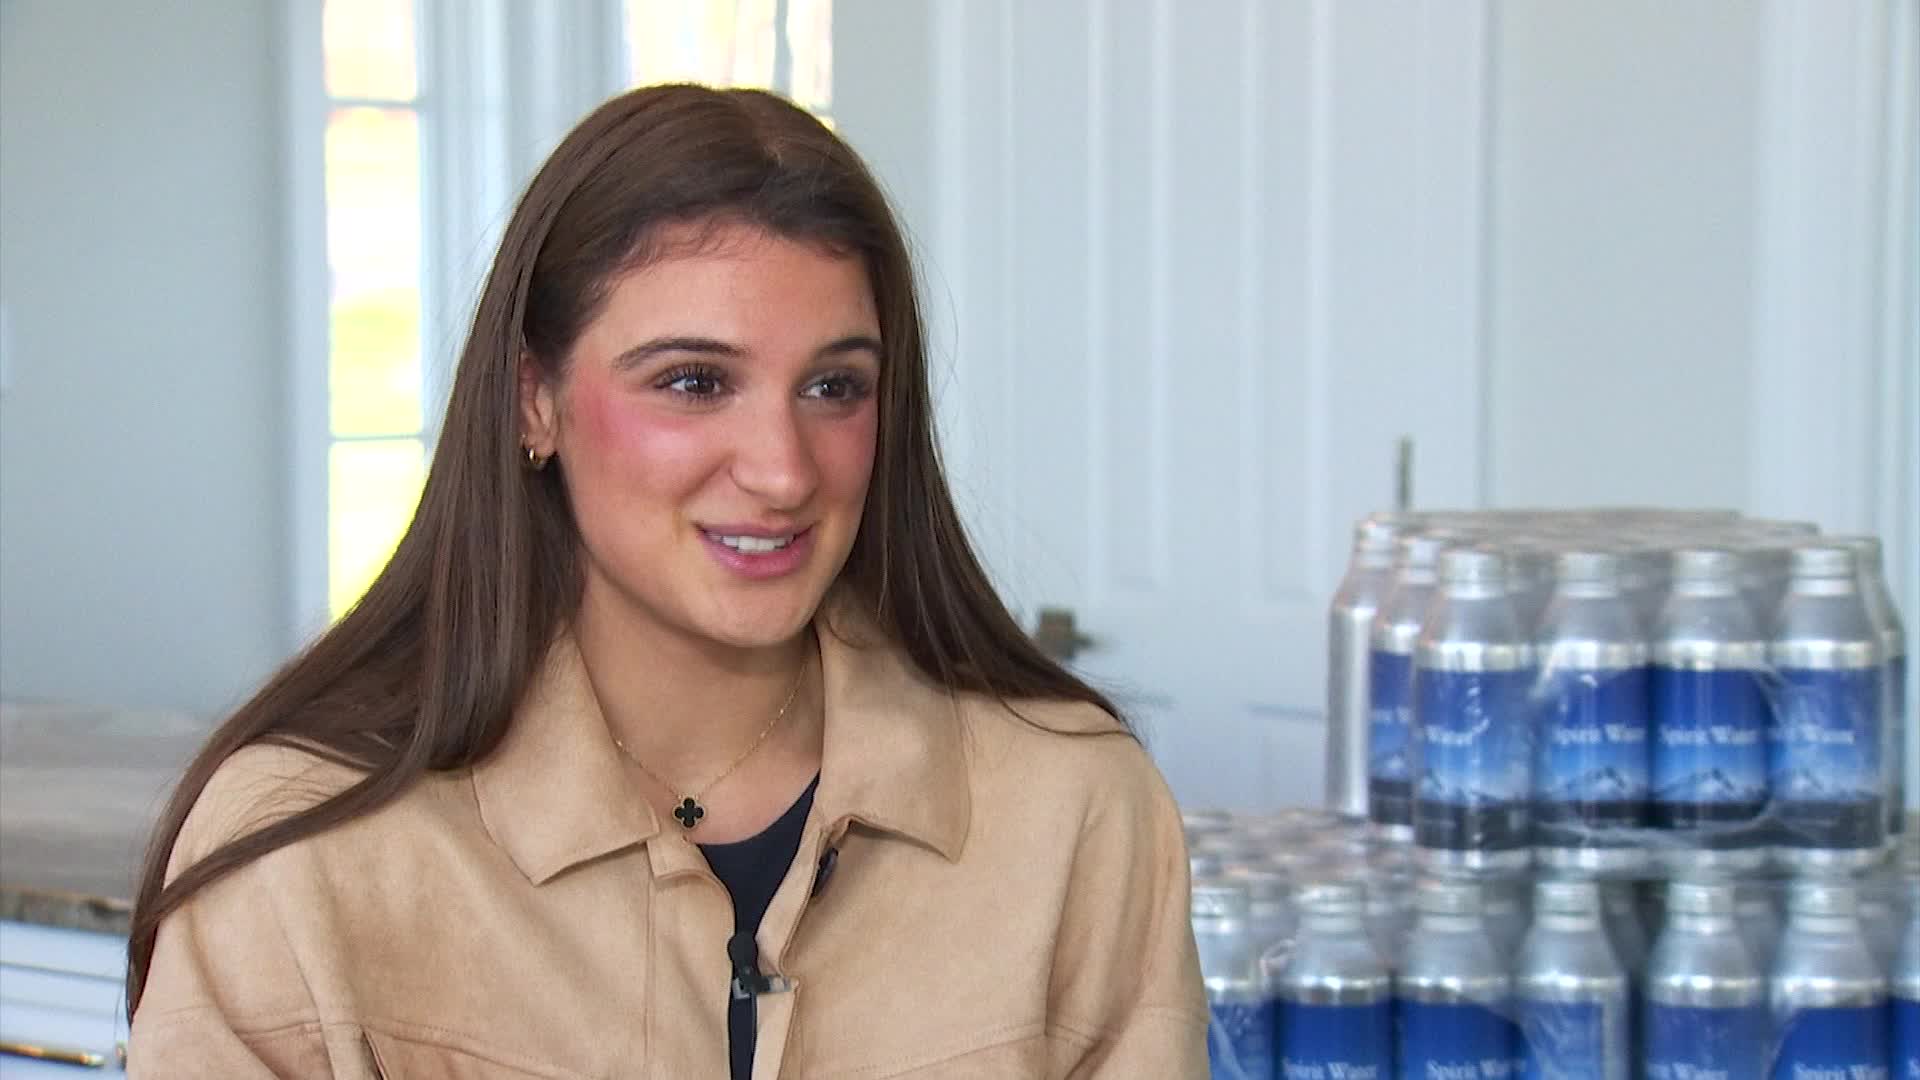 Latham woman finds niche with canned water business